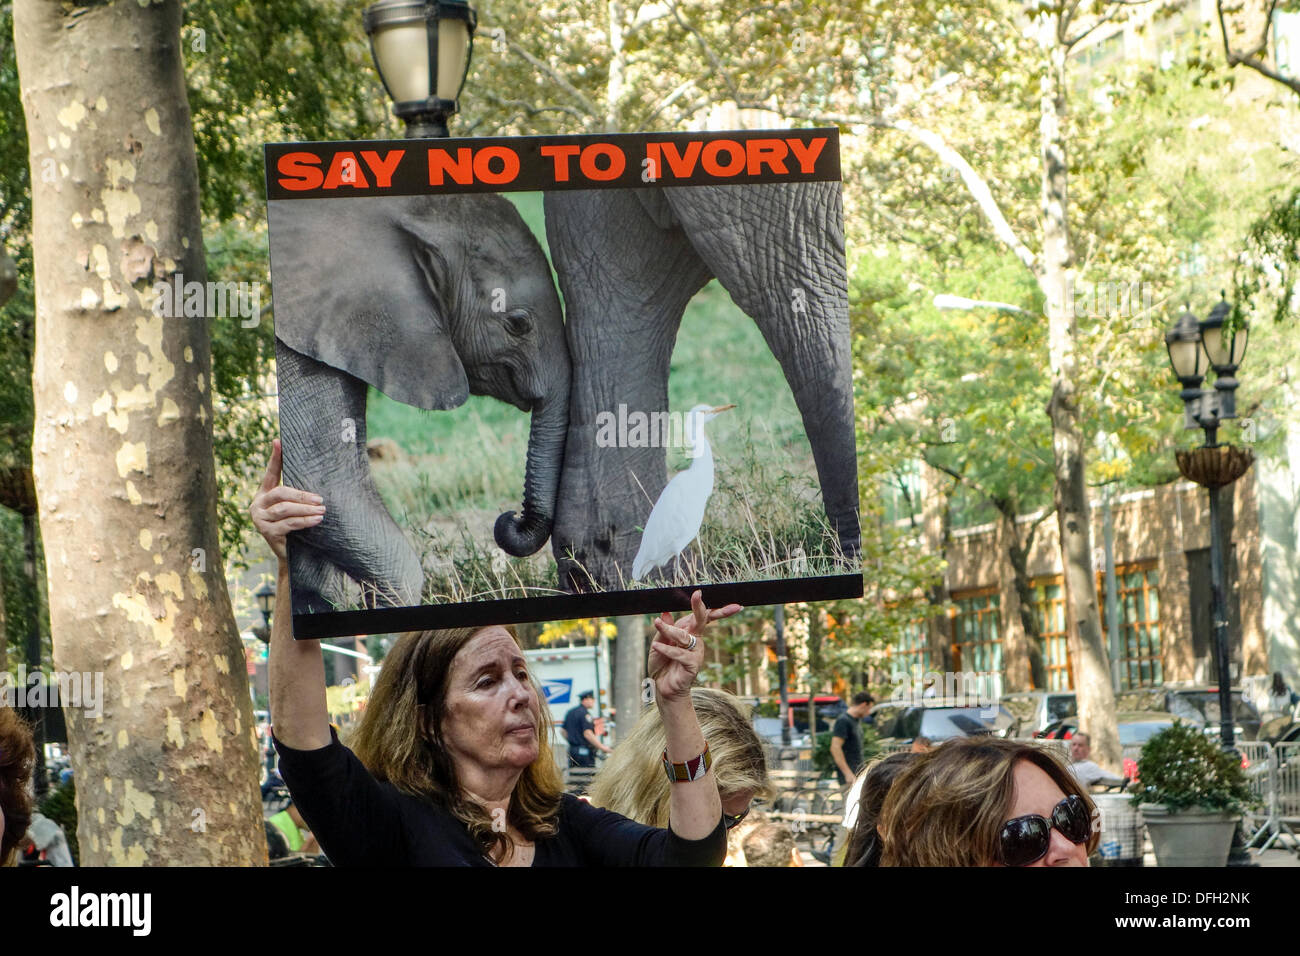 New York, NY, USA. 4th Oct. 2013. Supporters of iWorry march in a campaign to stop the killing of elephants for their ivory tusks. They head for the United Nations to present a letter calling for stricter penalties and a change in global policies regarding the killing of elephants and the sale of ivory. The David Sheldrick Wildlife Trust has organized the iWorry marches in 15 cities across the globe in the single largest demonstration of awareness for elephants. Credit:  Paulette Sinclair/Alamy Live News Stock Photo